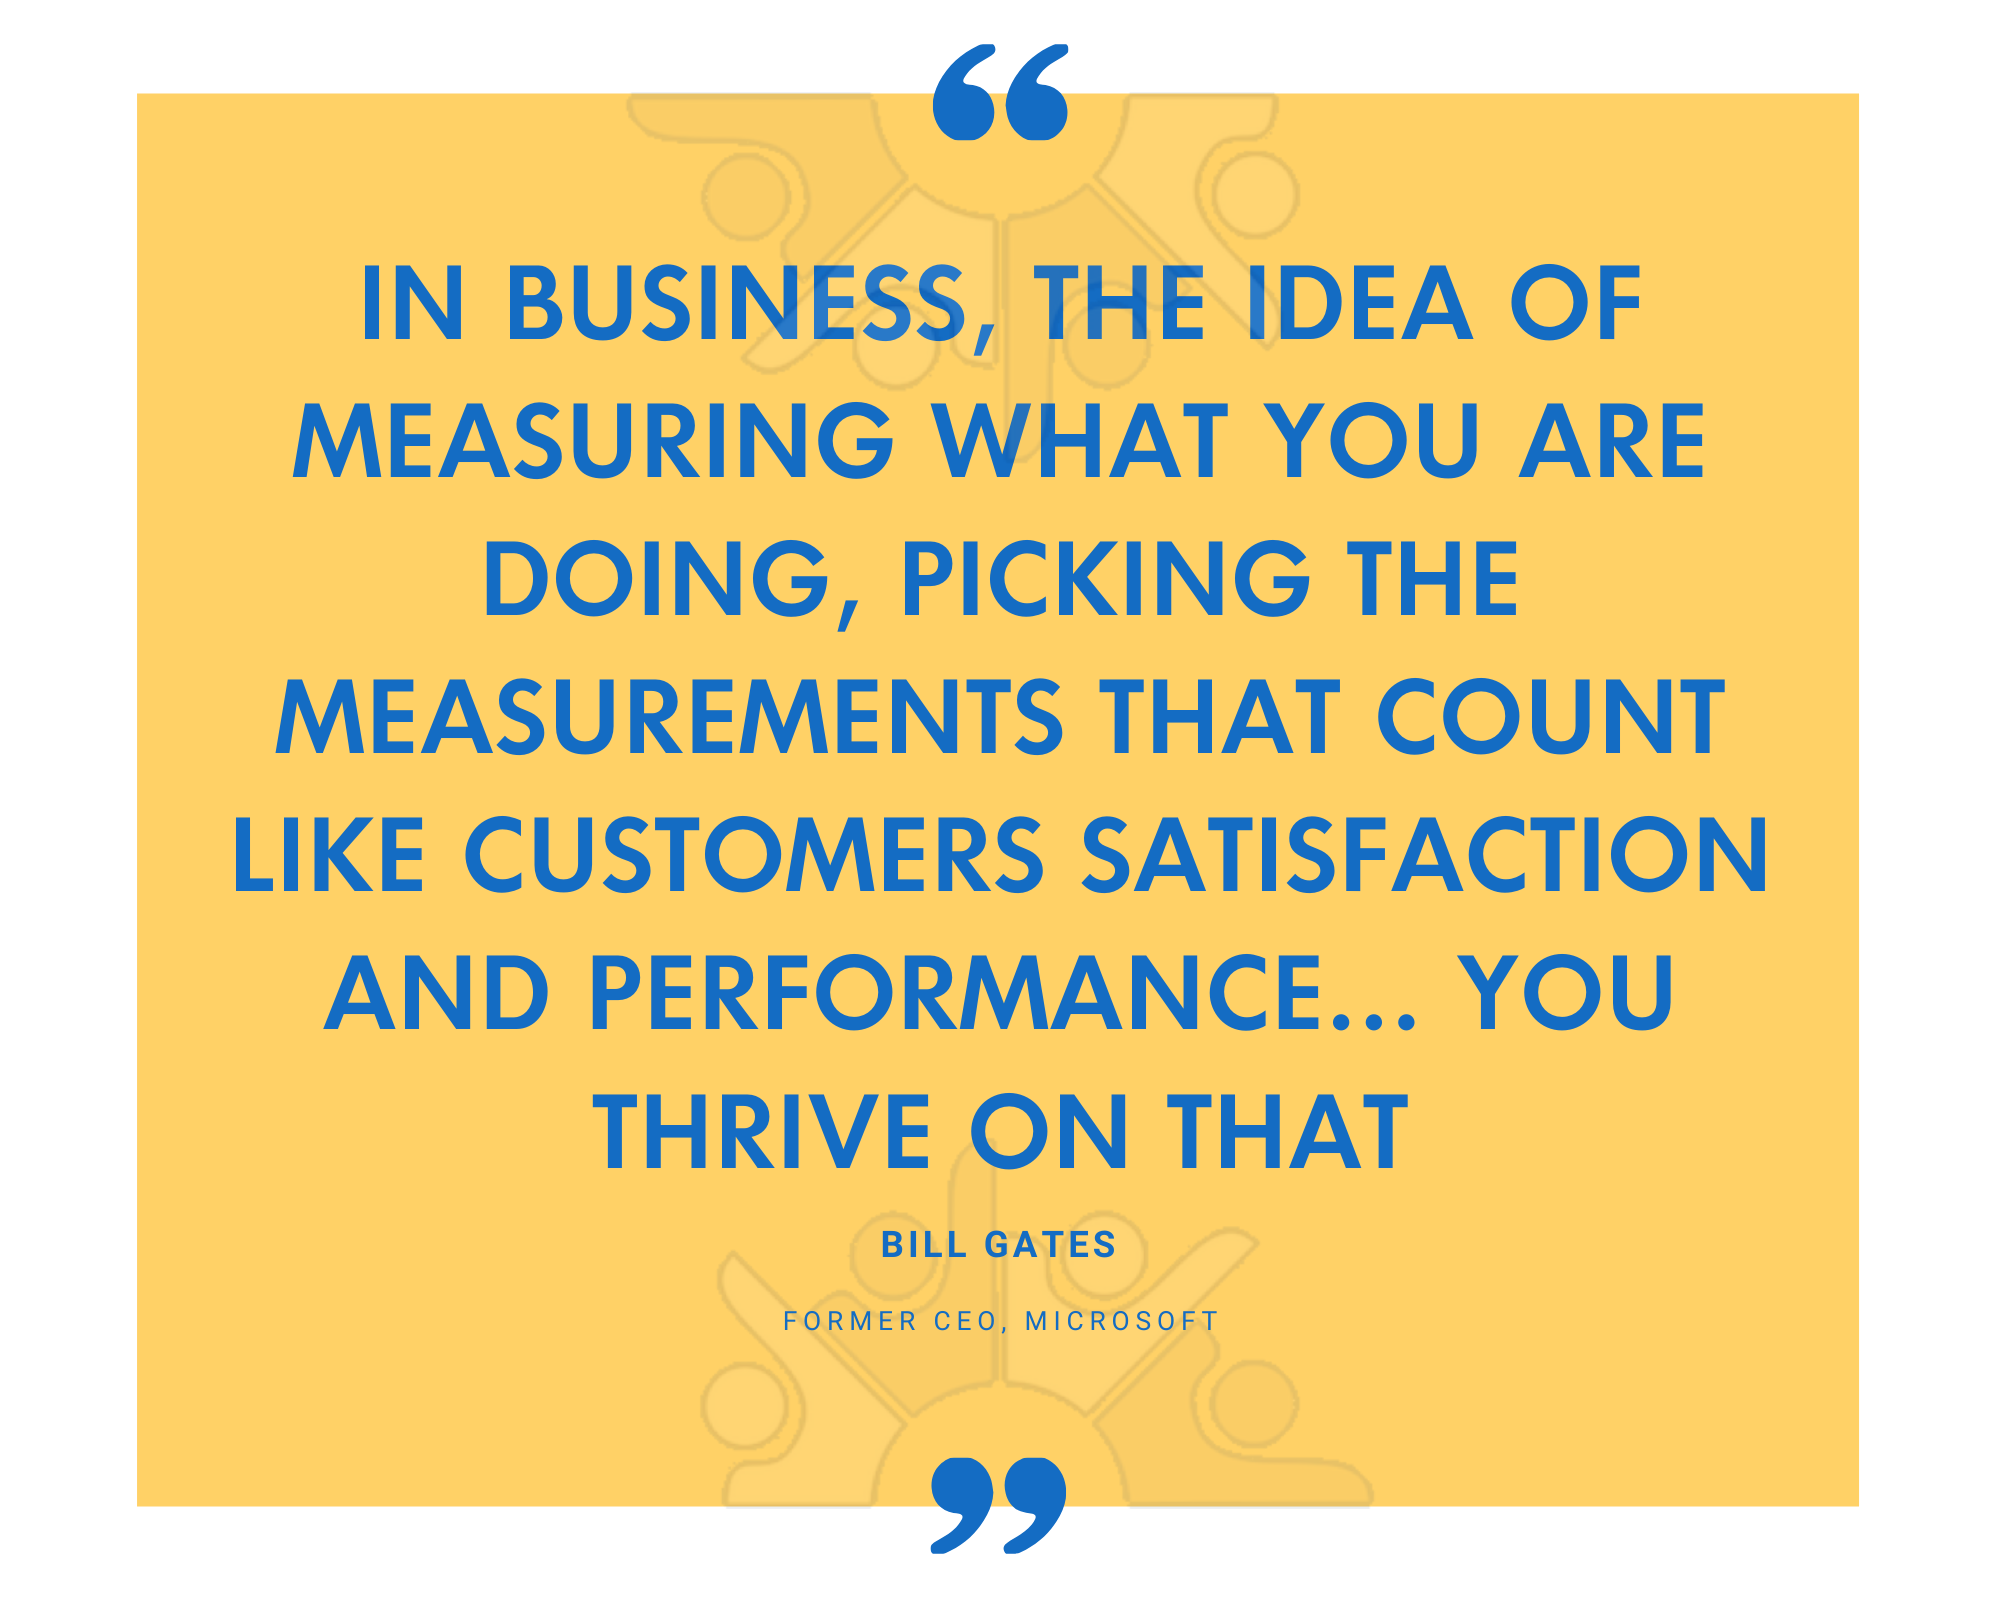 QUOTE in business the idea of measuring what you are doing